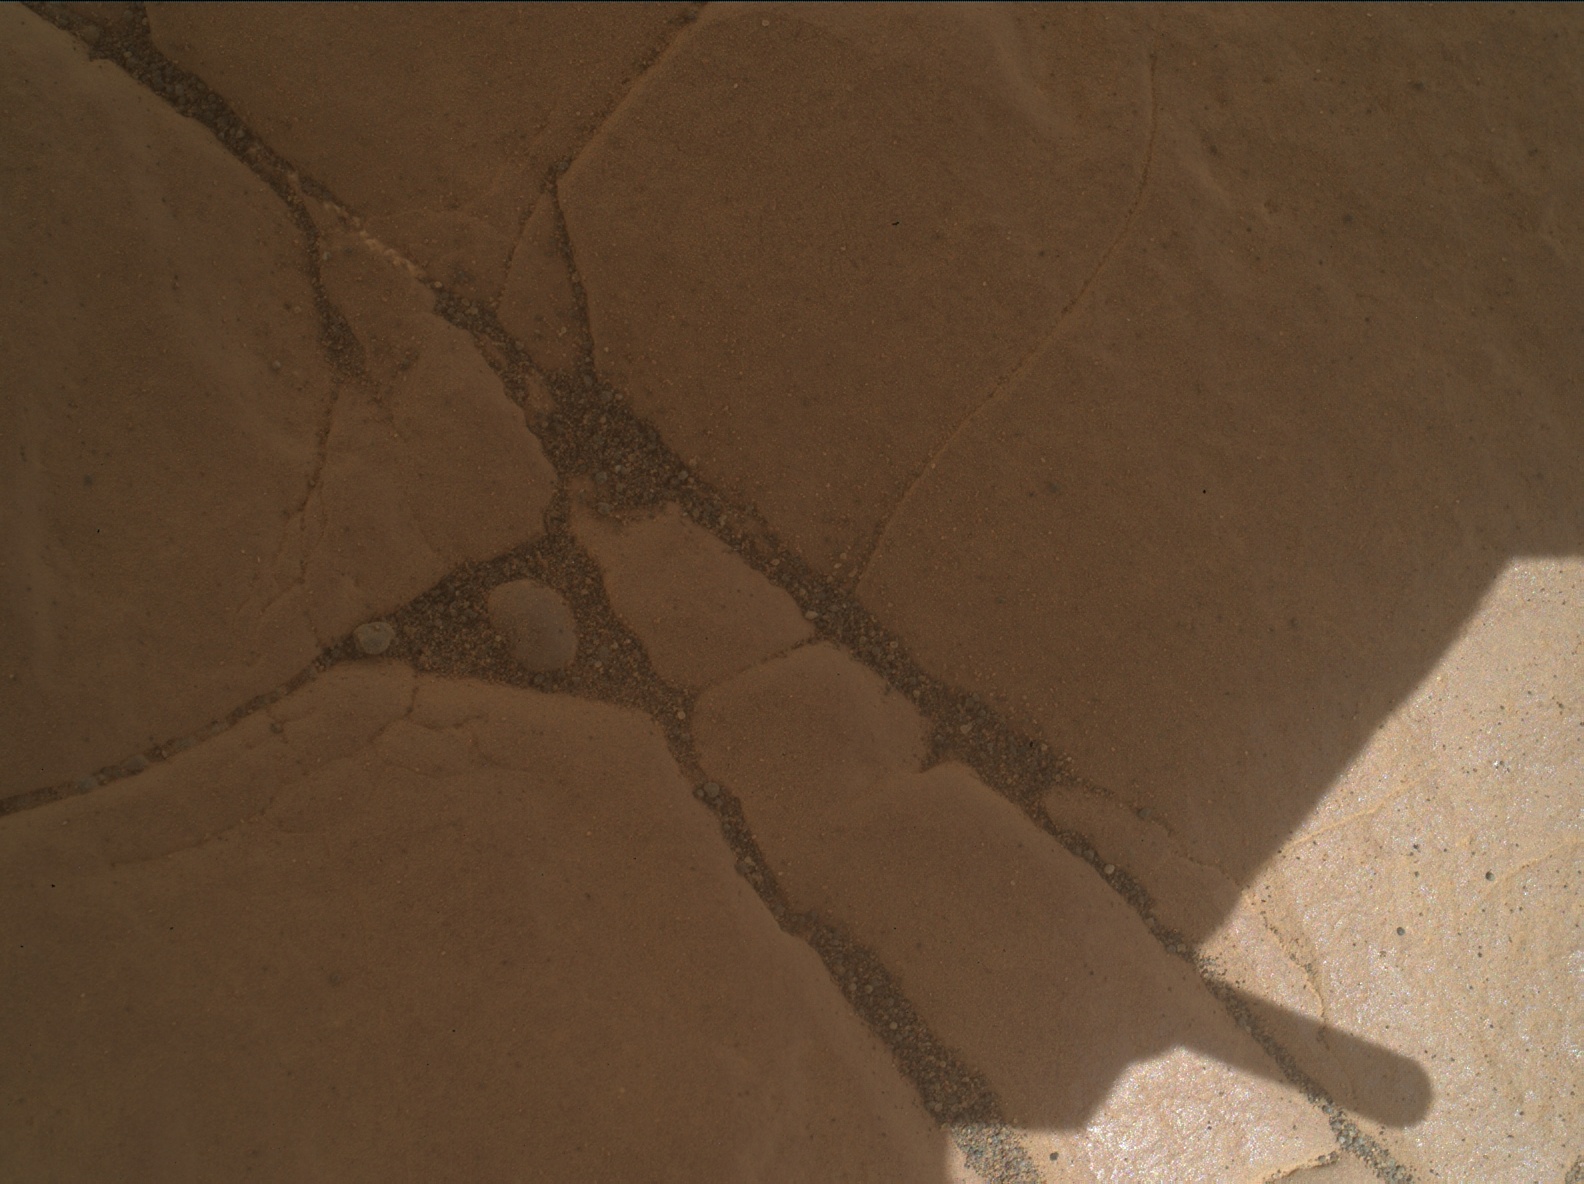 Nasa's Mars rover Curiosity acquired this image using its Mars Hand Lens Imager (MAHLI) on Sol 2414